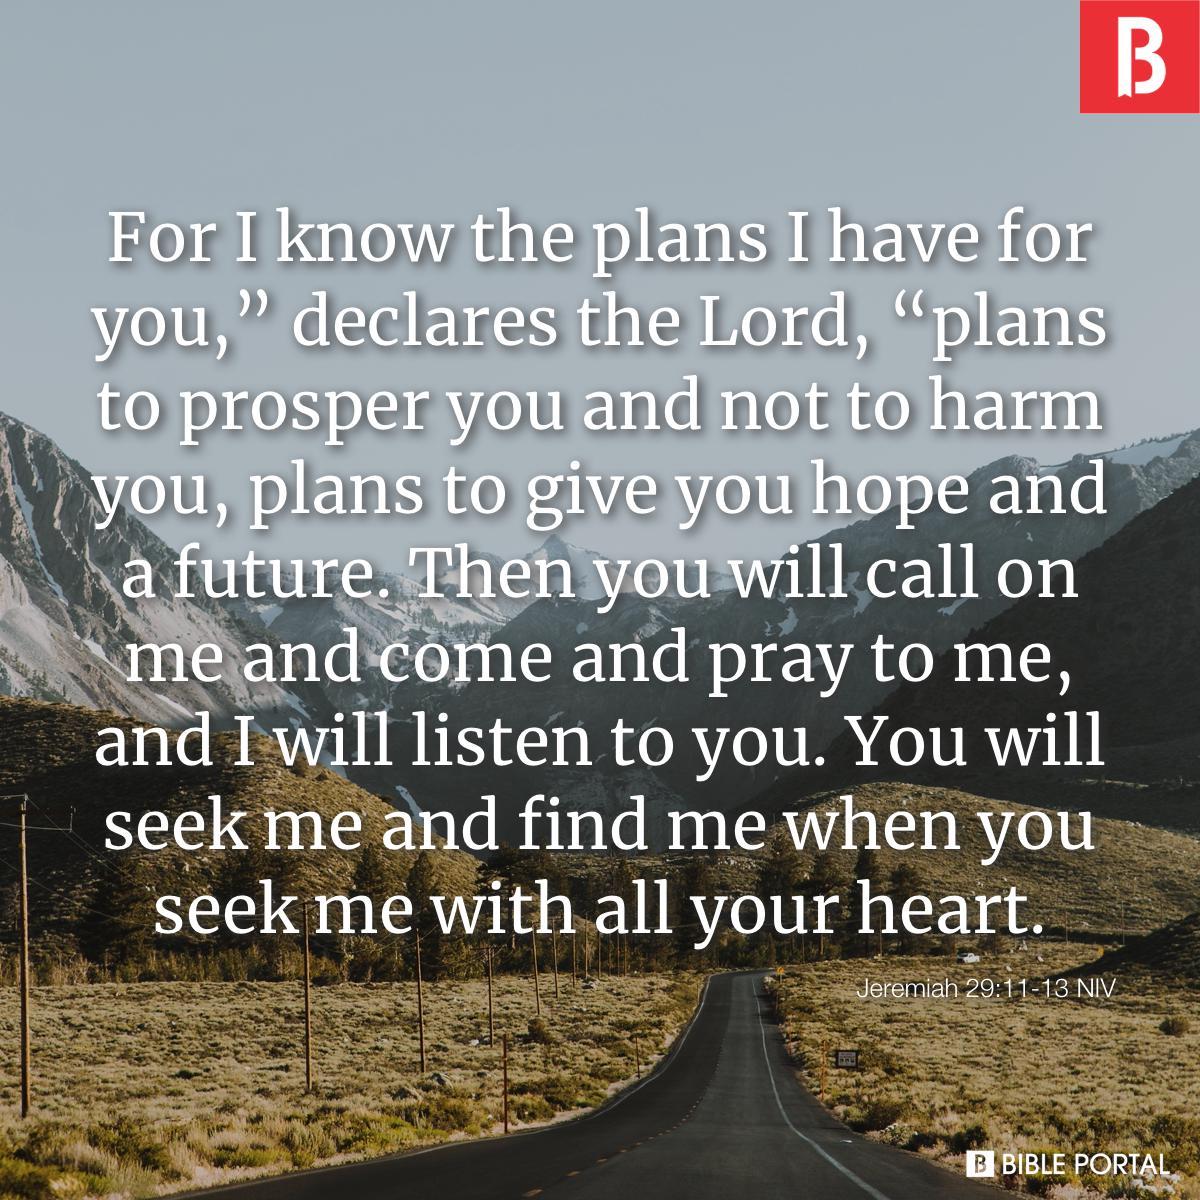 Bible verse of the day - January 13, 2022 - Jeremiah 29:11-13